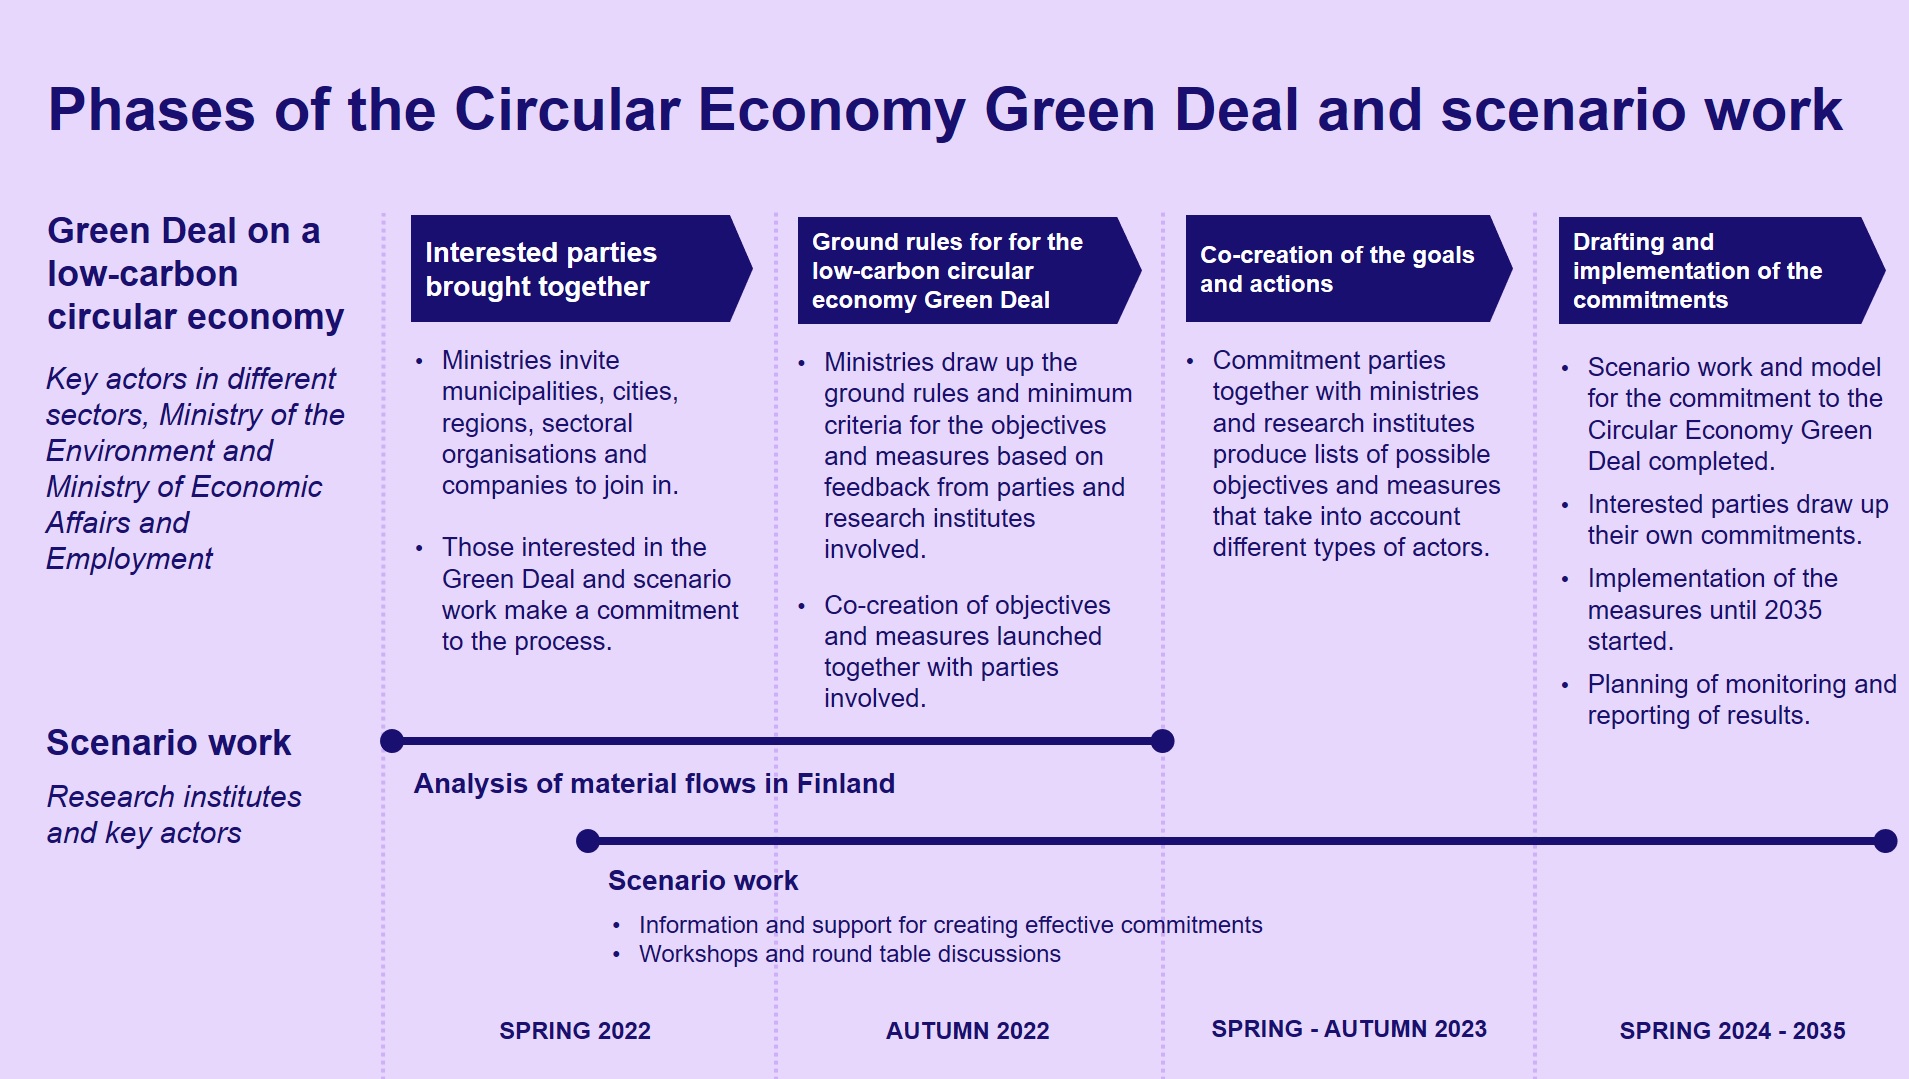 There are several phases in the Circular Economy Green Deal and scenario work. Those committed to the development process work together with the ministries to set the criteria, objectives and measures for the Green Deal. First, the interested parties are brought together. The ministries invite municipalities, cities, regions, sectoral organisations and companies to join in. Those interested in the Green Deal and scenario work make a commitment to the process. Next, the ministries draw up the ground rules and minimum criteria for the objectives and measures to be selected for the commitments based on feedback from parties and research institutes involved. Co-creation of objectives and measures is launched together with the parties that have gotten involved. Those committed to the development produce lists of possible objectives and measures that take into account different types of actors. Based on these lists, the parties involved formulate their own commitments in accordance with the minimum criteria. Then they will proceed to the implementation, monitoring and reporting of the measures. The work on the Circular Economy Green Deal and the material flow analyses and scenarios to support it will continue until the end of 2023. The implementation of the measures of the Circular Economy Green Deal starts in 2024 and will continue until 2035.